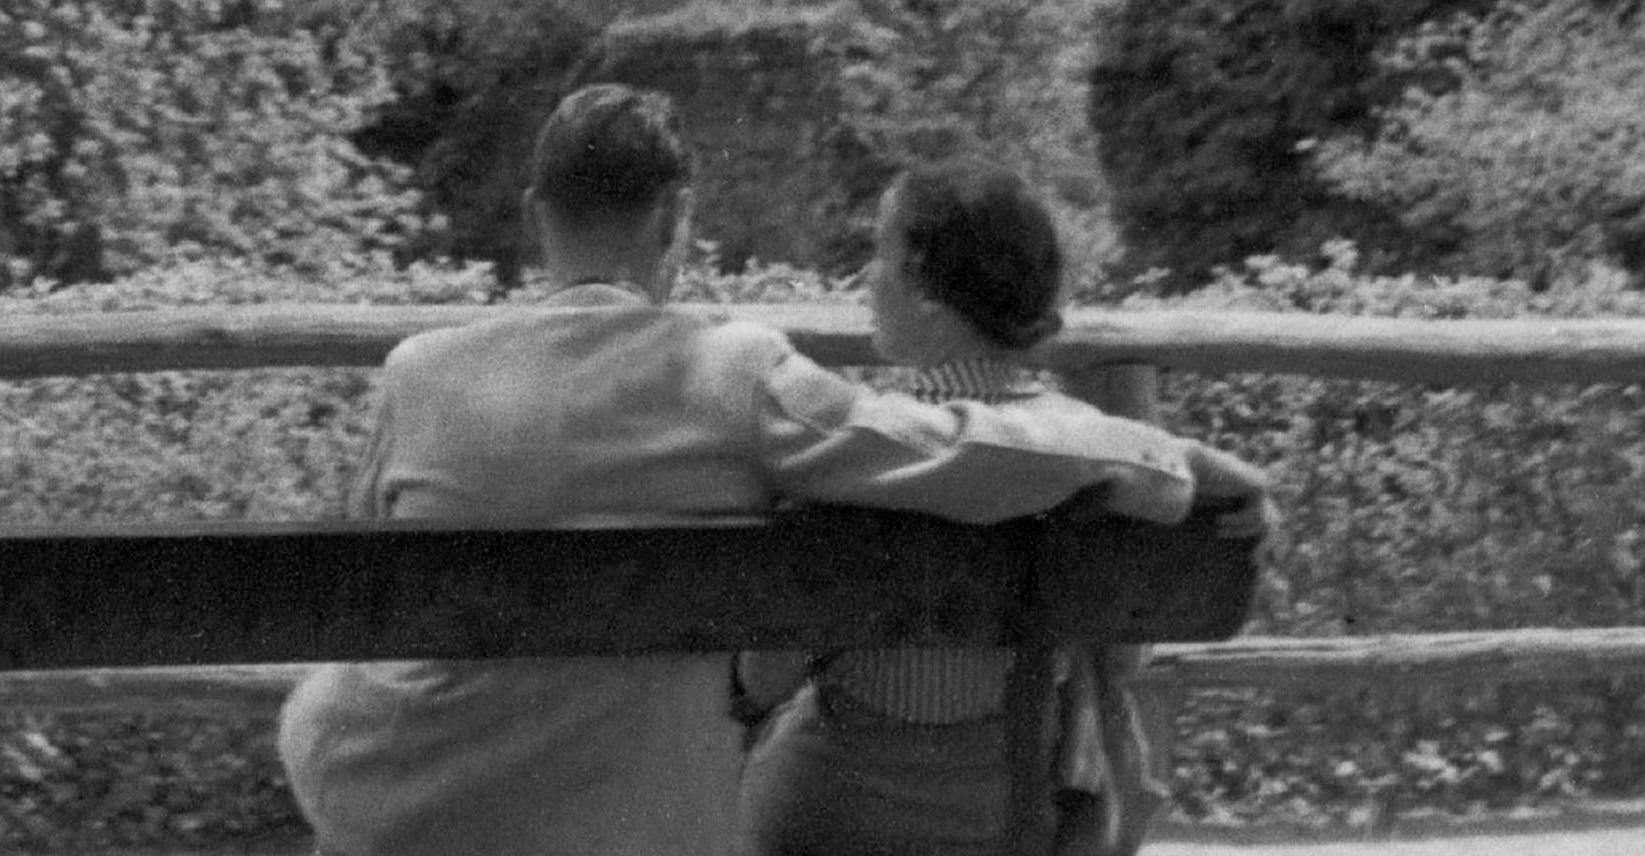 Couple on a bench front of Heidelberg castle, Germany 1936, Printed Later  - Modern Photograph by Karl Heinrich Lämmel